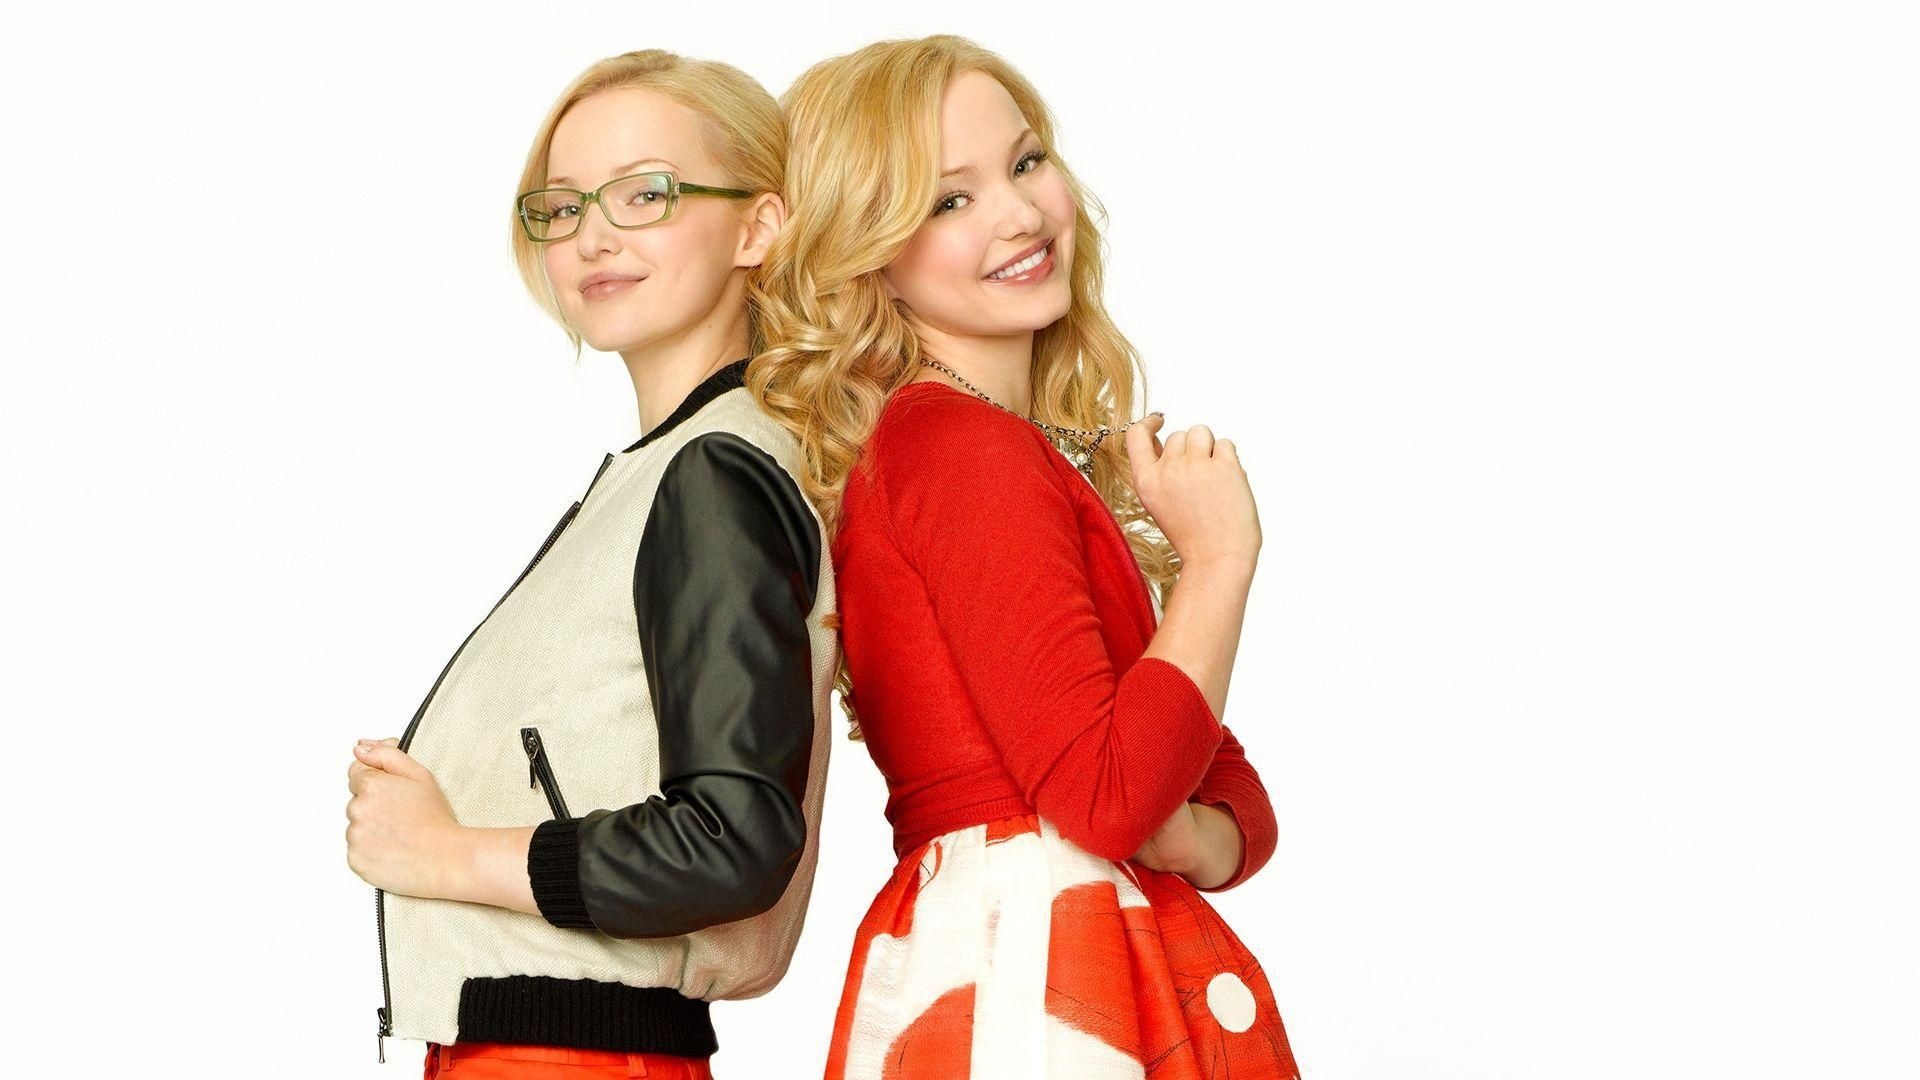 Liv and Maddie wallpapers, Download at WallpaperBro, Liv and Maddie fashion, TV show, 1920x1080 Full HD Desktop